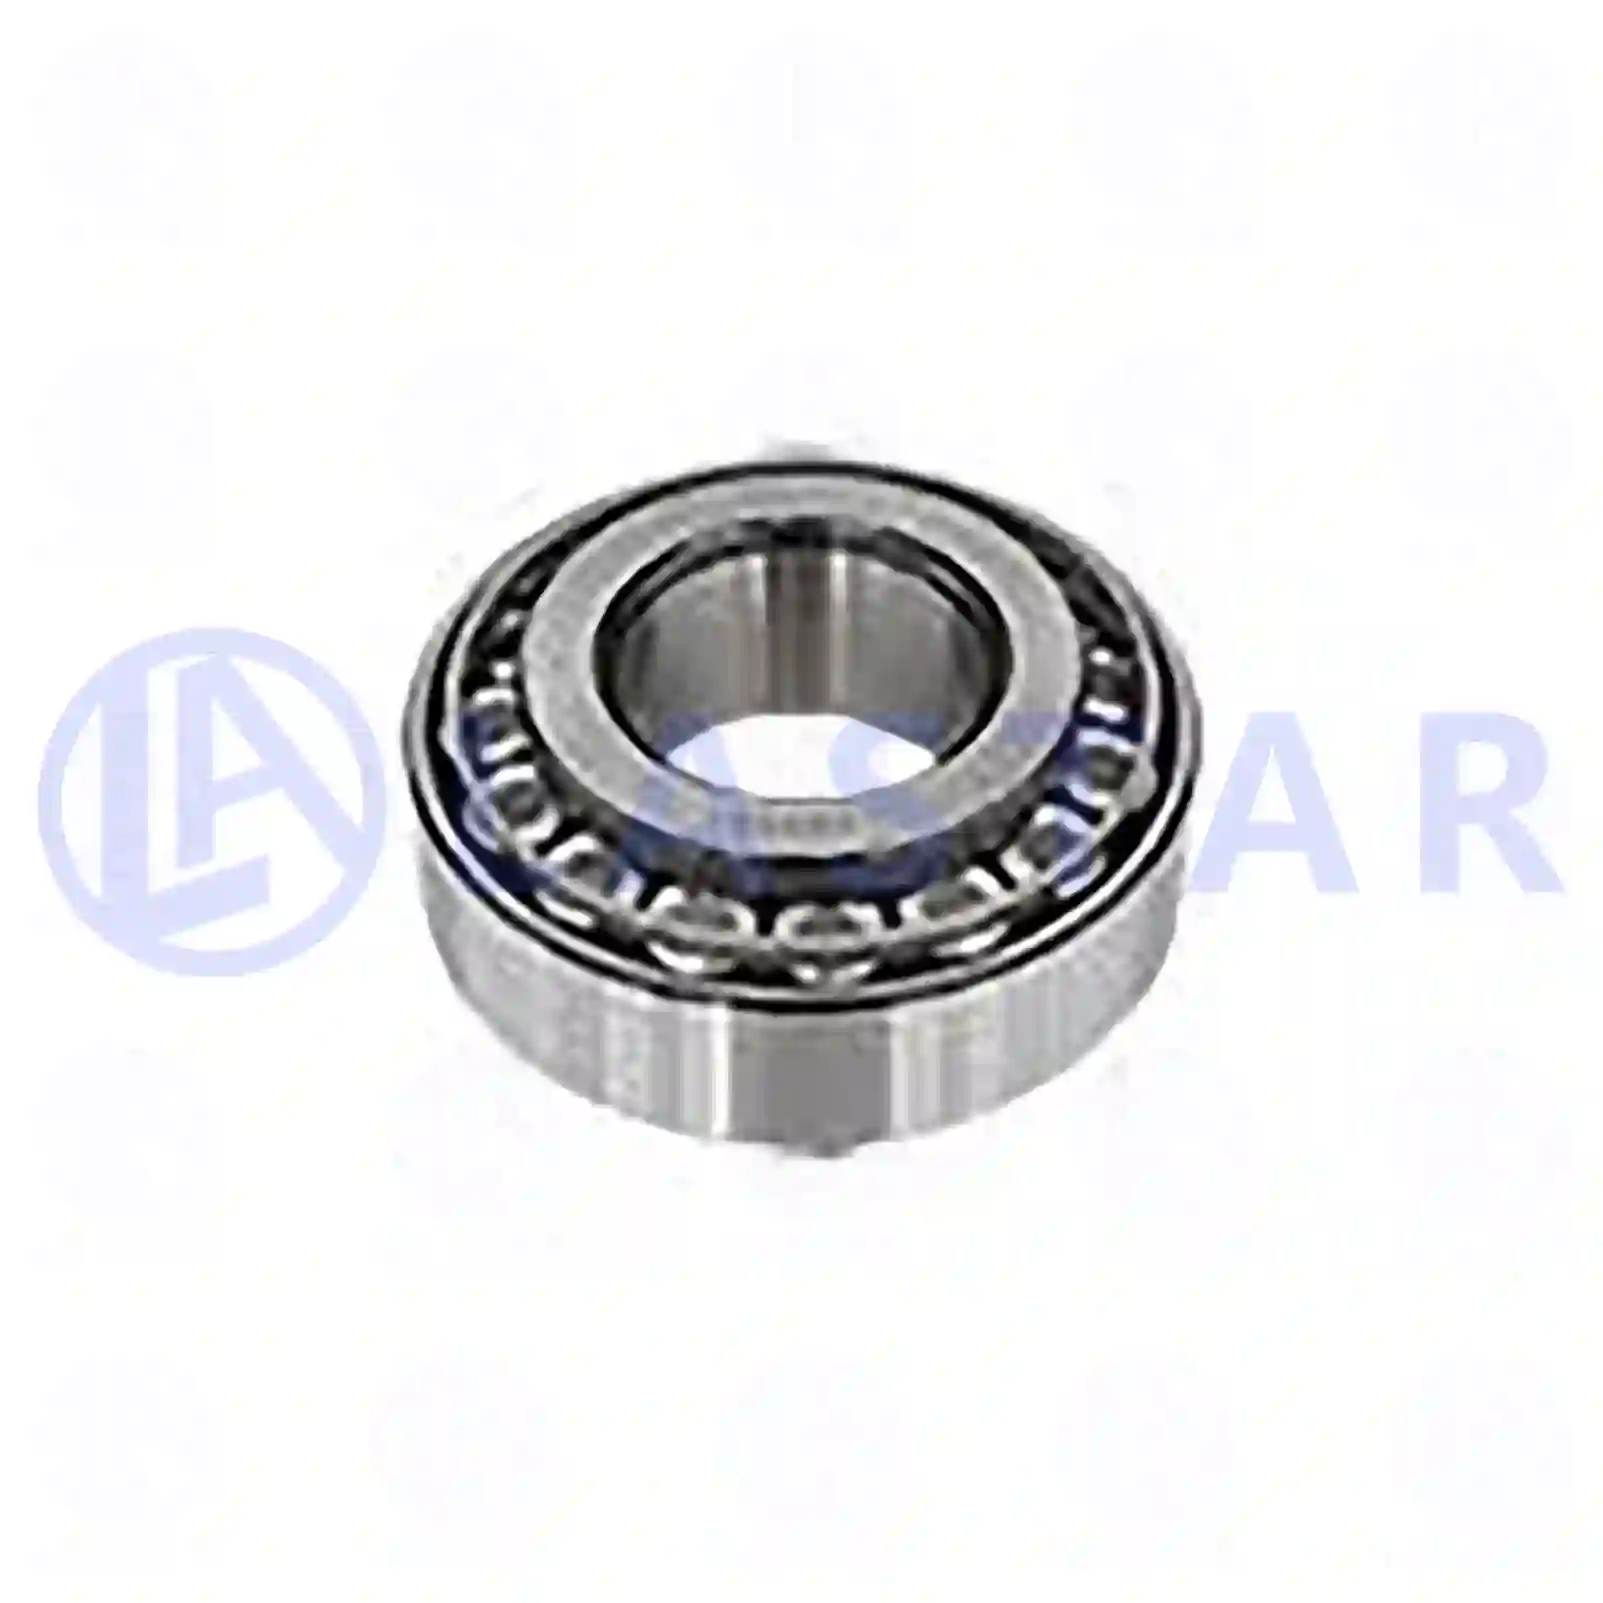 Rear Axle, Complete Tapered roller bearing, la no: 77730745 ,  oem no:06324990095, 0009814118, 0039816905, 0039817005, 0059810505, 0059813605, 0059814805, 0119810105, 2V5609747R Lastar Spare Part | Truck Spare Parts, Auotomotive Spare Parts